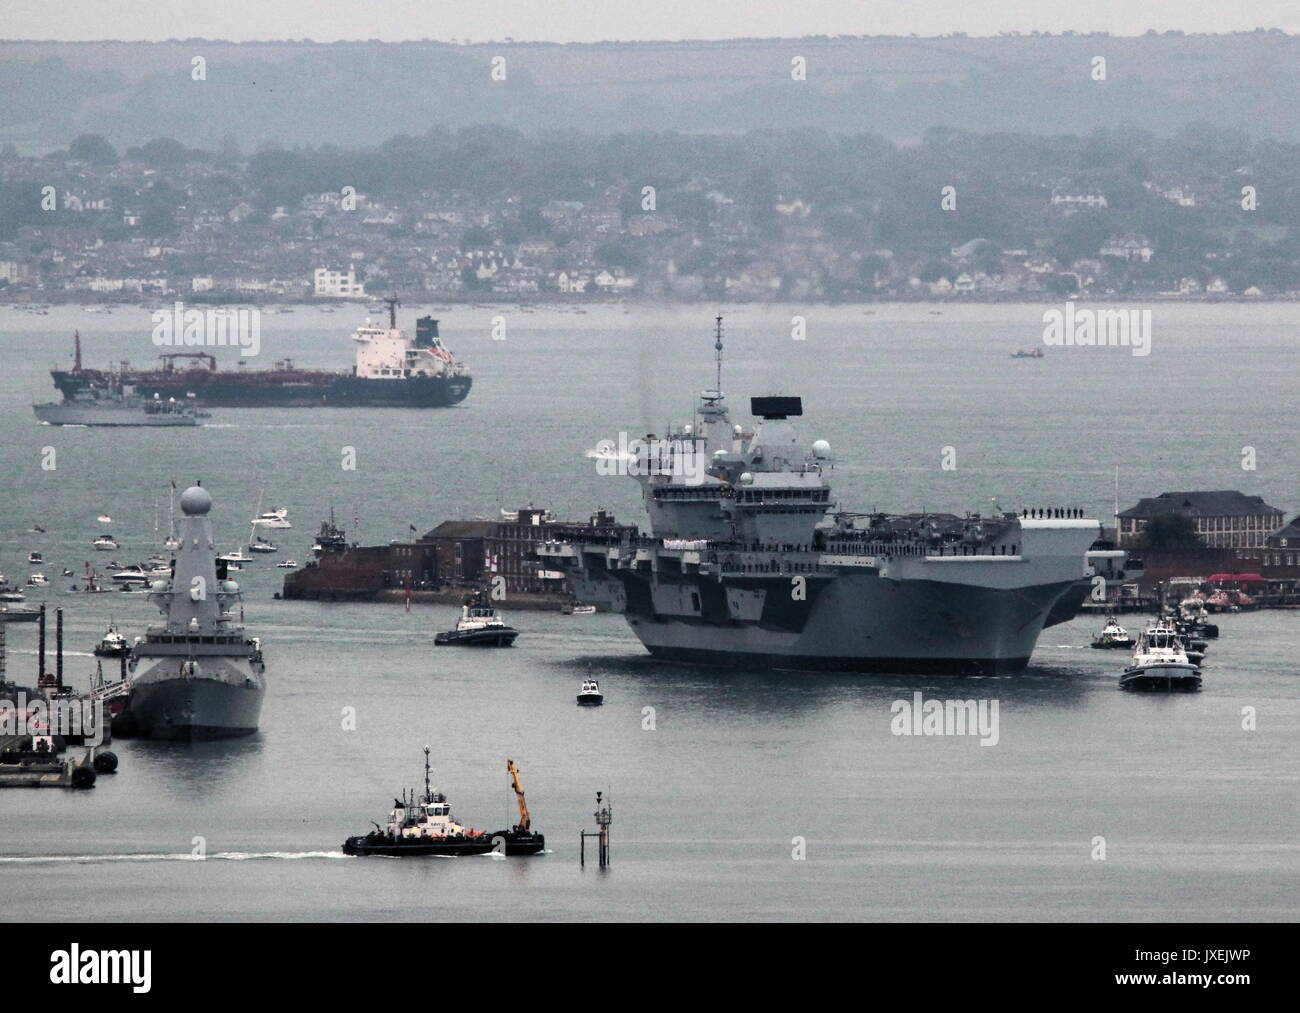 Portsmouth, UK. 16th August, 2017. - Royal Navy's biggest warship sails into home port - HMS Queen Elizabeth, the first of two 65,000 tonne, 900 ft long, state-of-the-art aircraft carriers sailed into Portsmouth Naval Base in the early hours of this morning, gently pushed and shoved by six tugs into her new berth on Princess Royal Jetty. The £3bn carrier, the largest warship ever built for the Royal Navy, arrived at her home port two days ahead of her original schedule.  Photo:Steve Foulkes/Ajax/Alamy Live News. Stock Photo